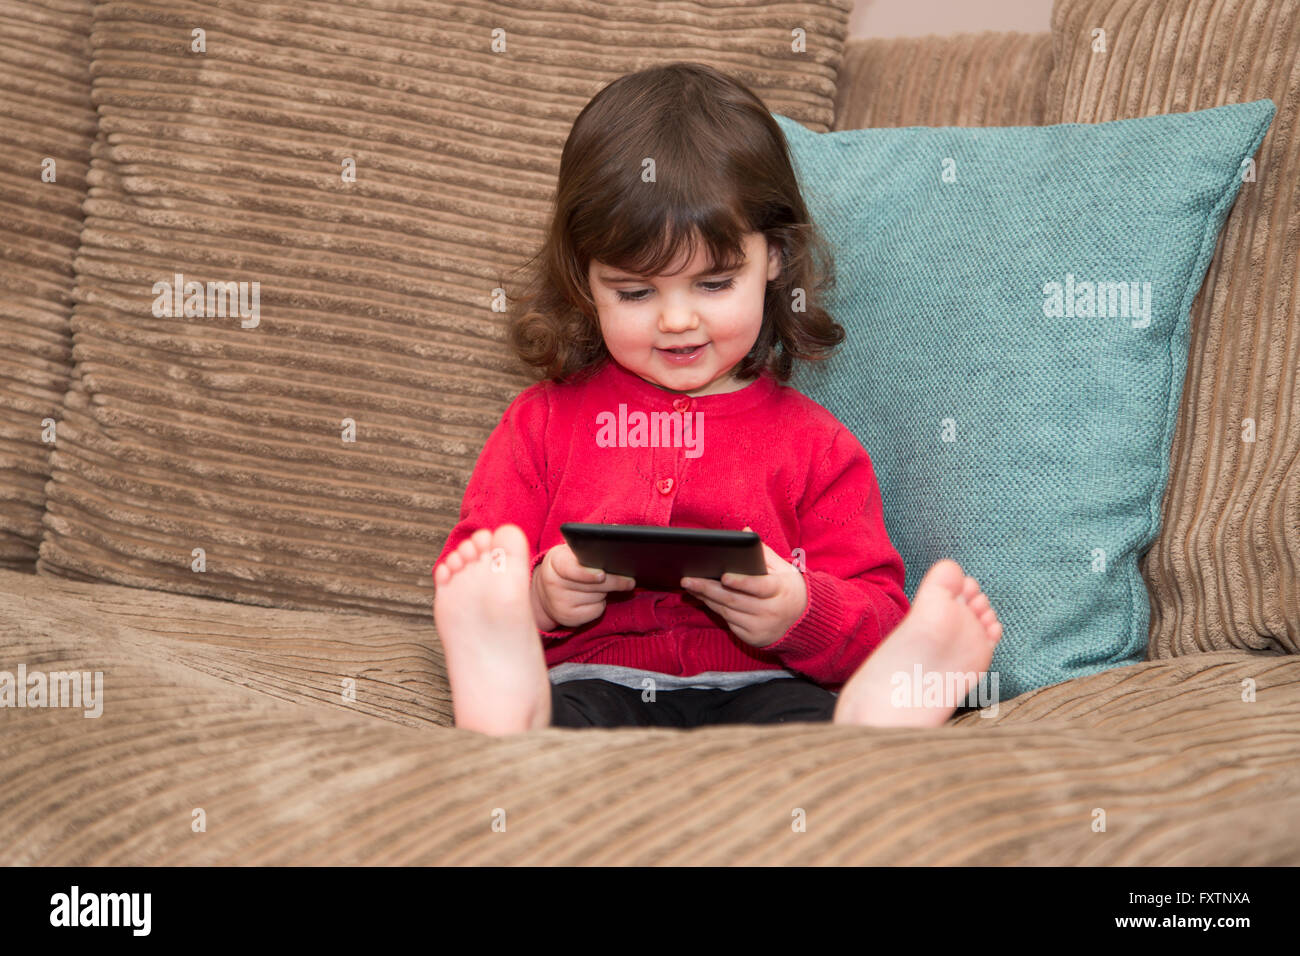 Young girls learning by watching tablet Stock Photo